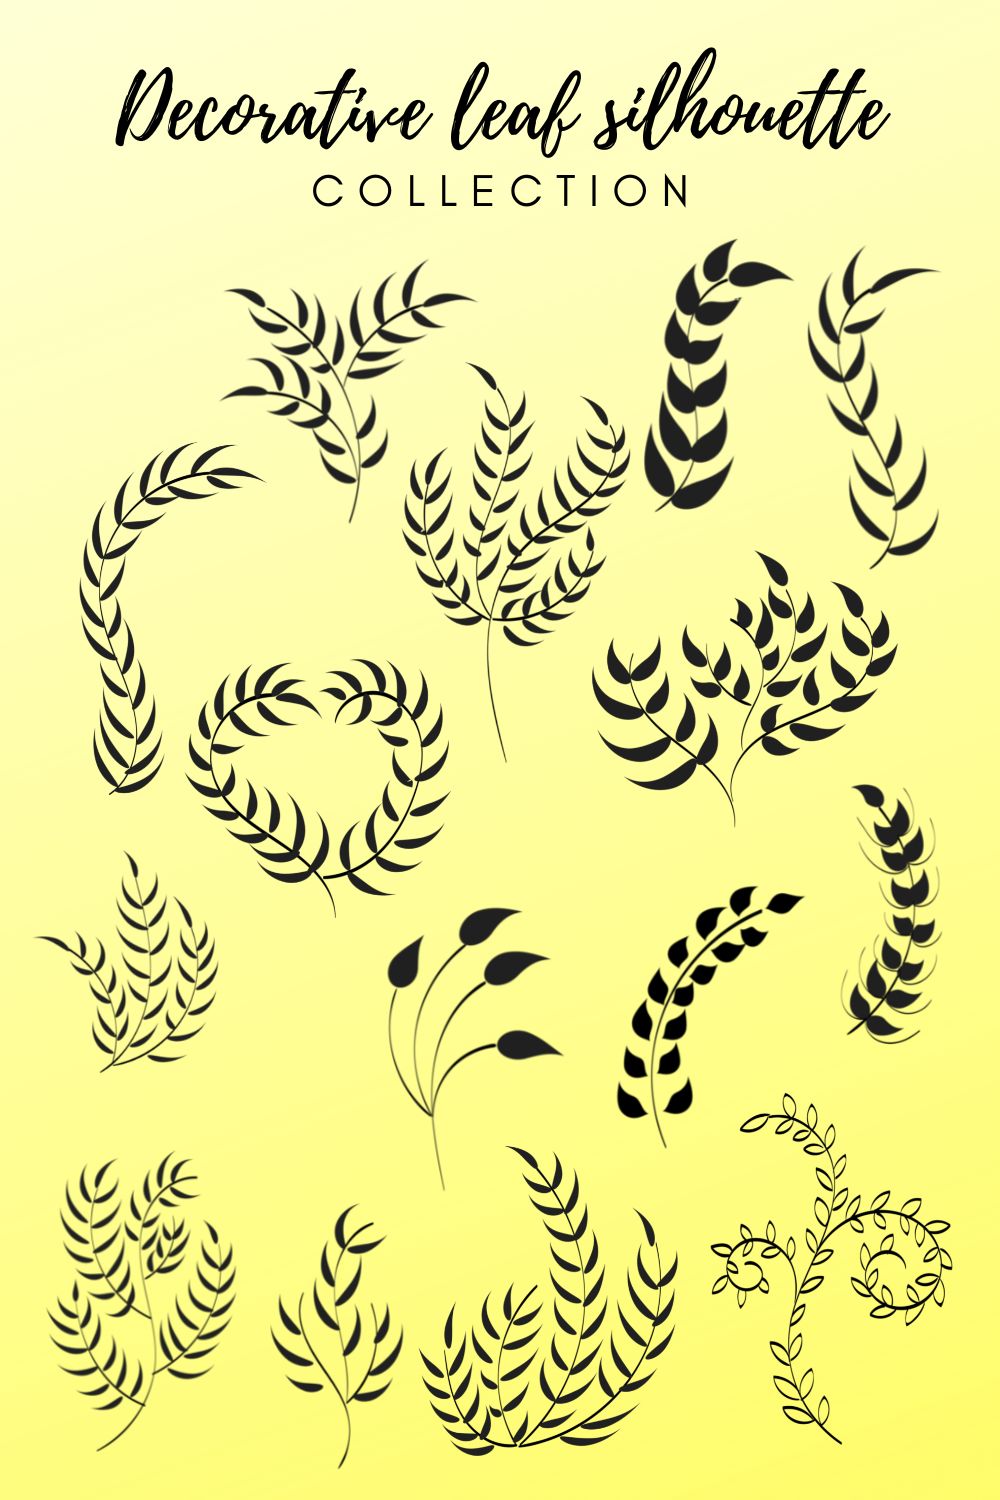 15 Decorative Leaf Silhouette - Only $8 pinterest image.